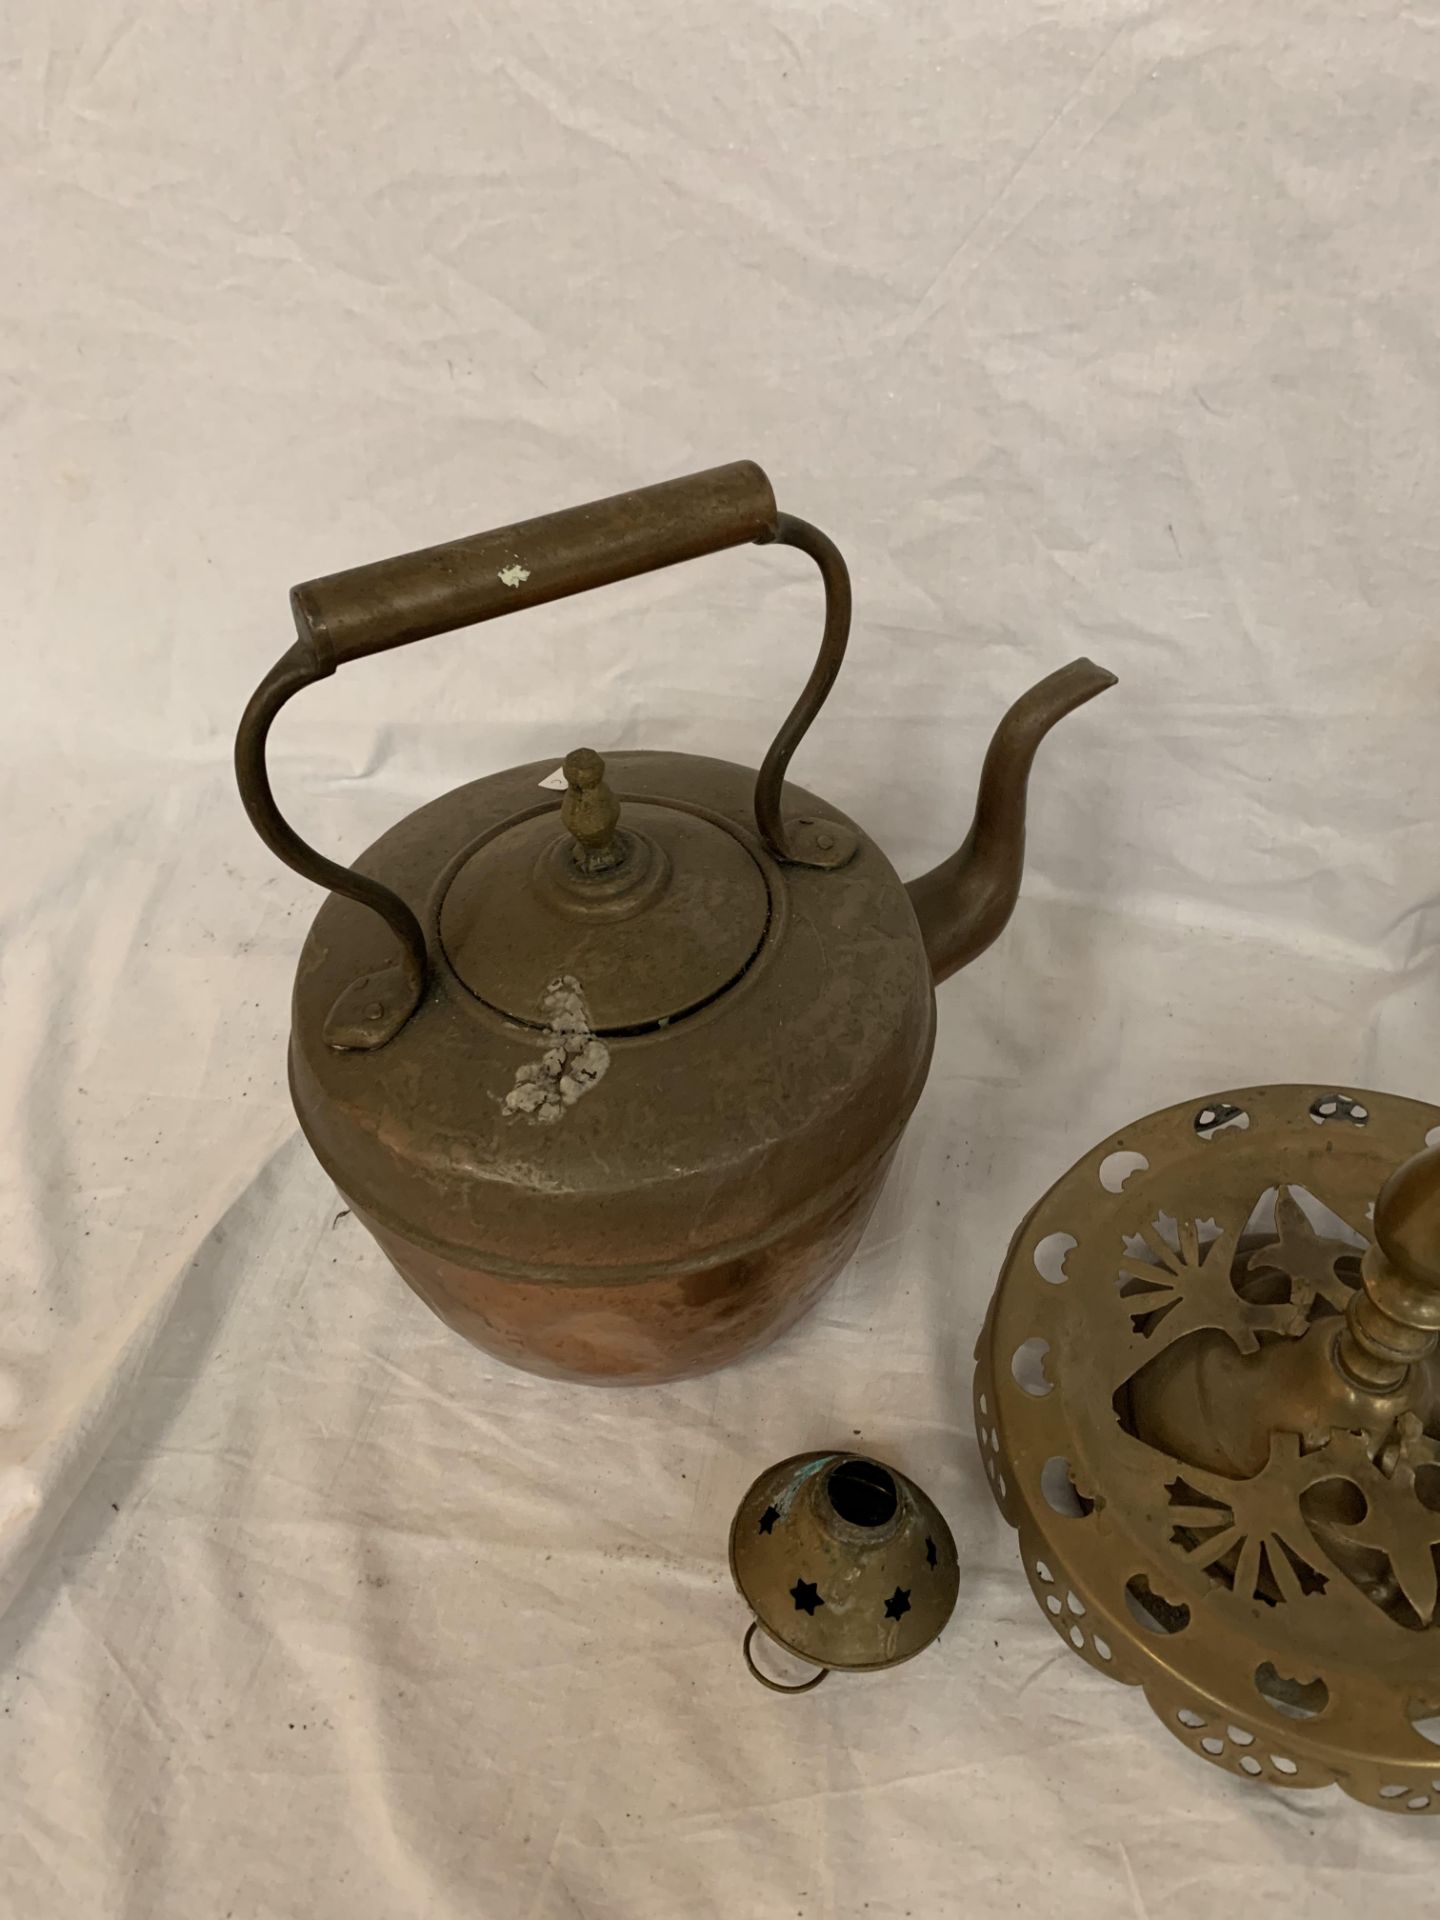 A VINTAGE BRASS TRIVET STAND TOGETHER WITH TWO COPPER STOVE TOP KETTLES - Image 4 of 6